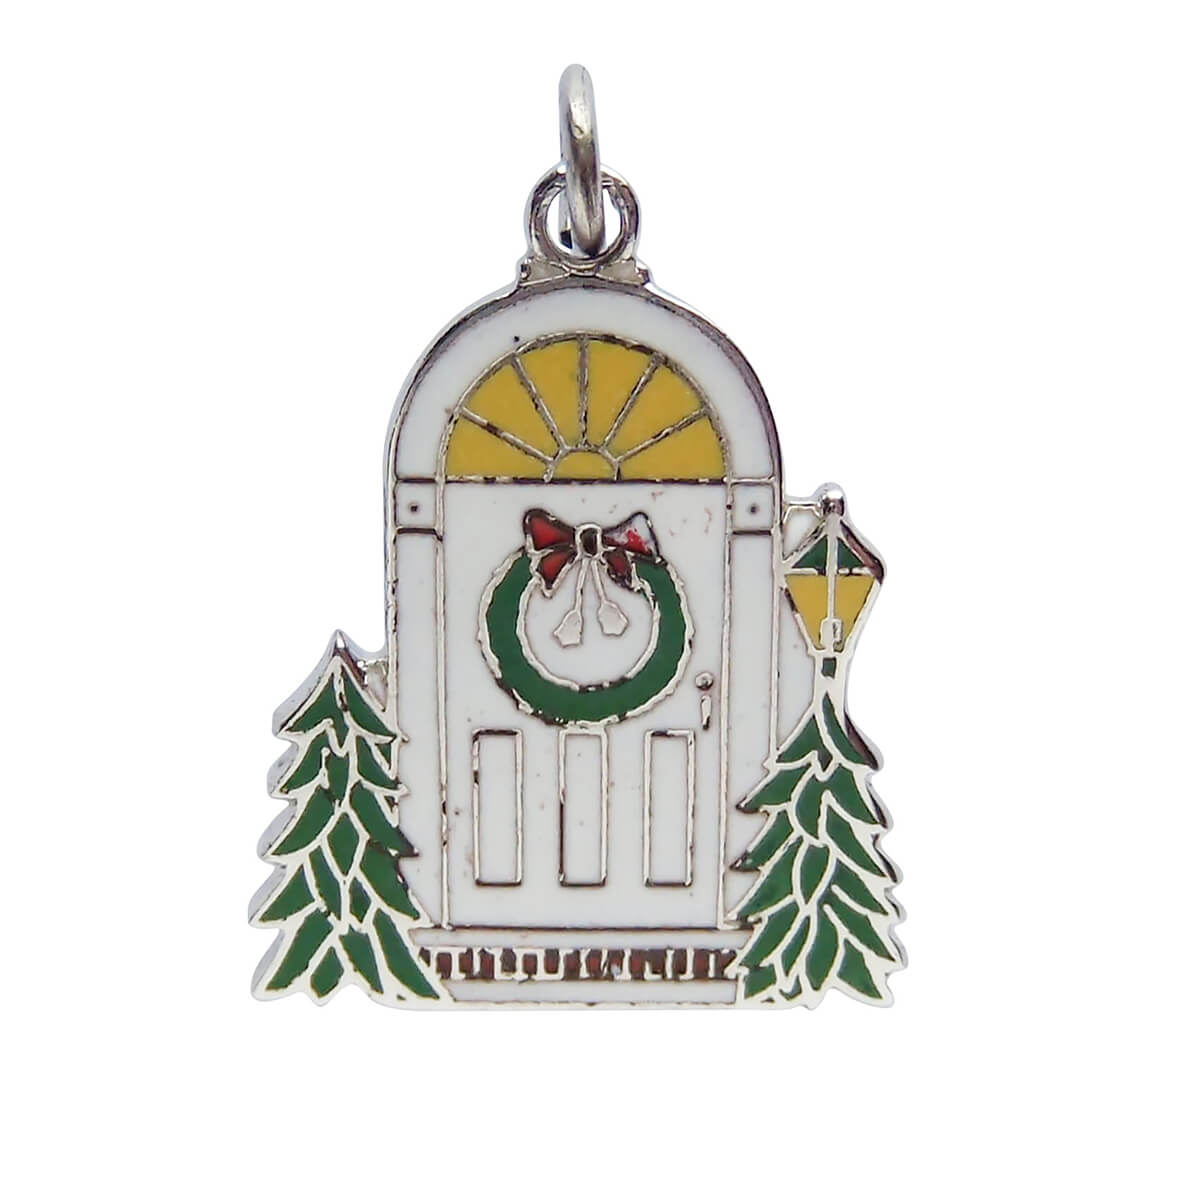 Vintage xmas decorated front door charm sterling silver pendant made by Griffith